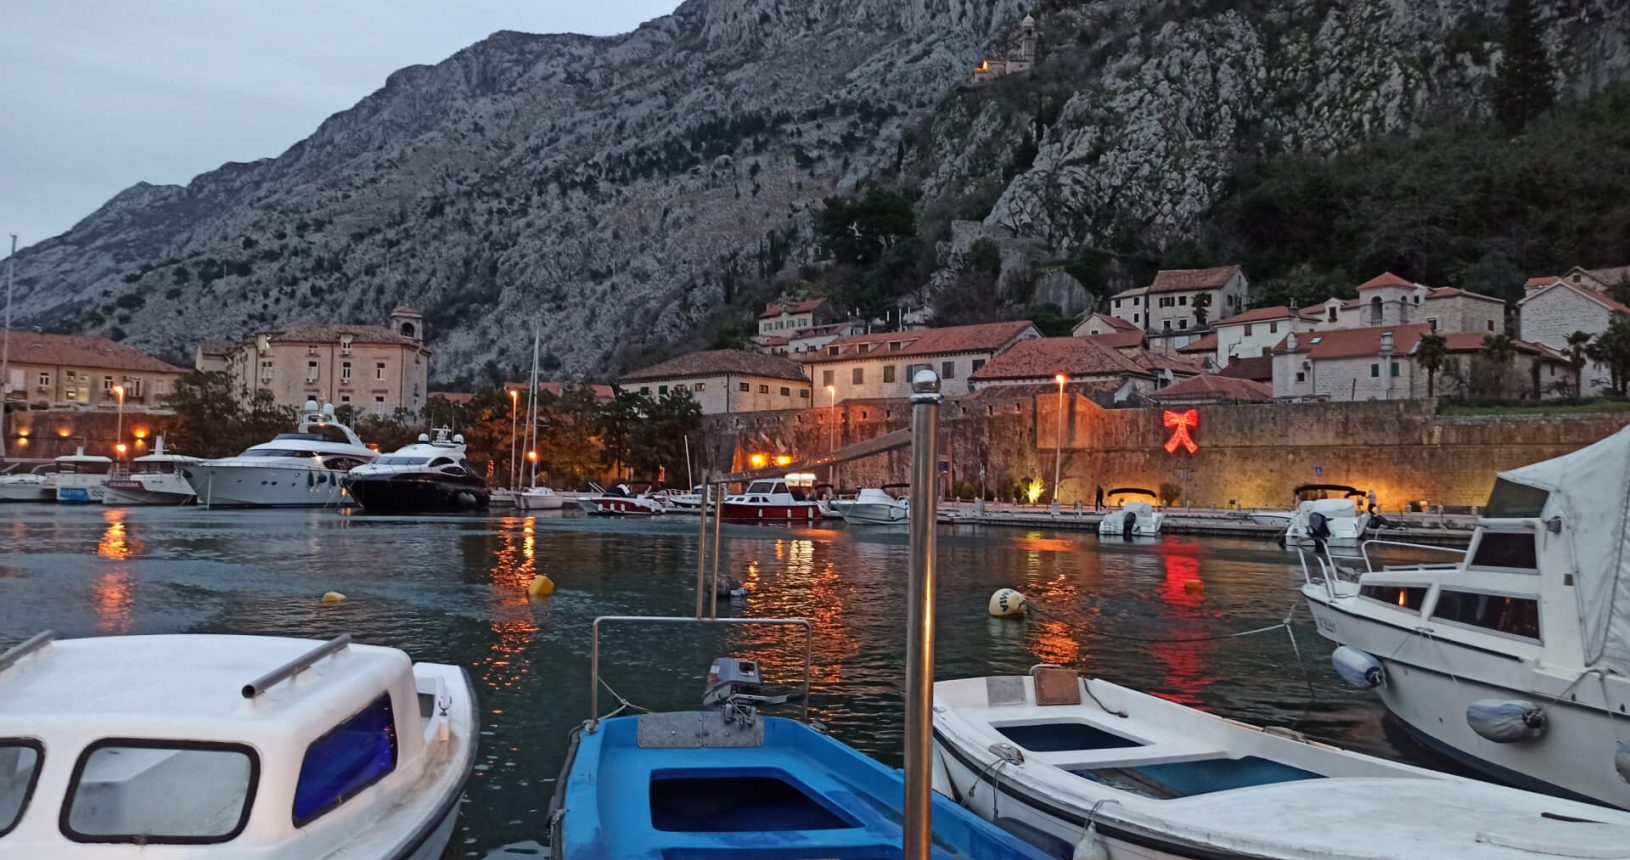 The view to mountains and Kotor castle at night